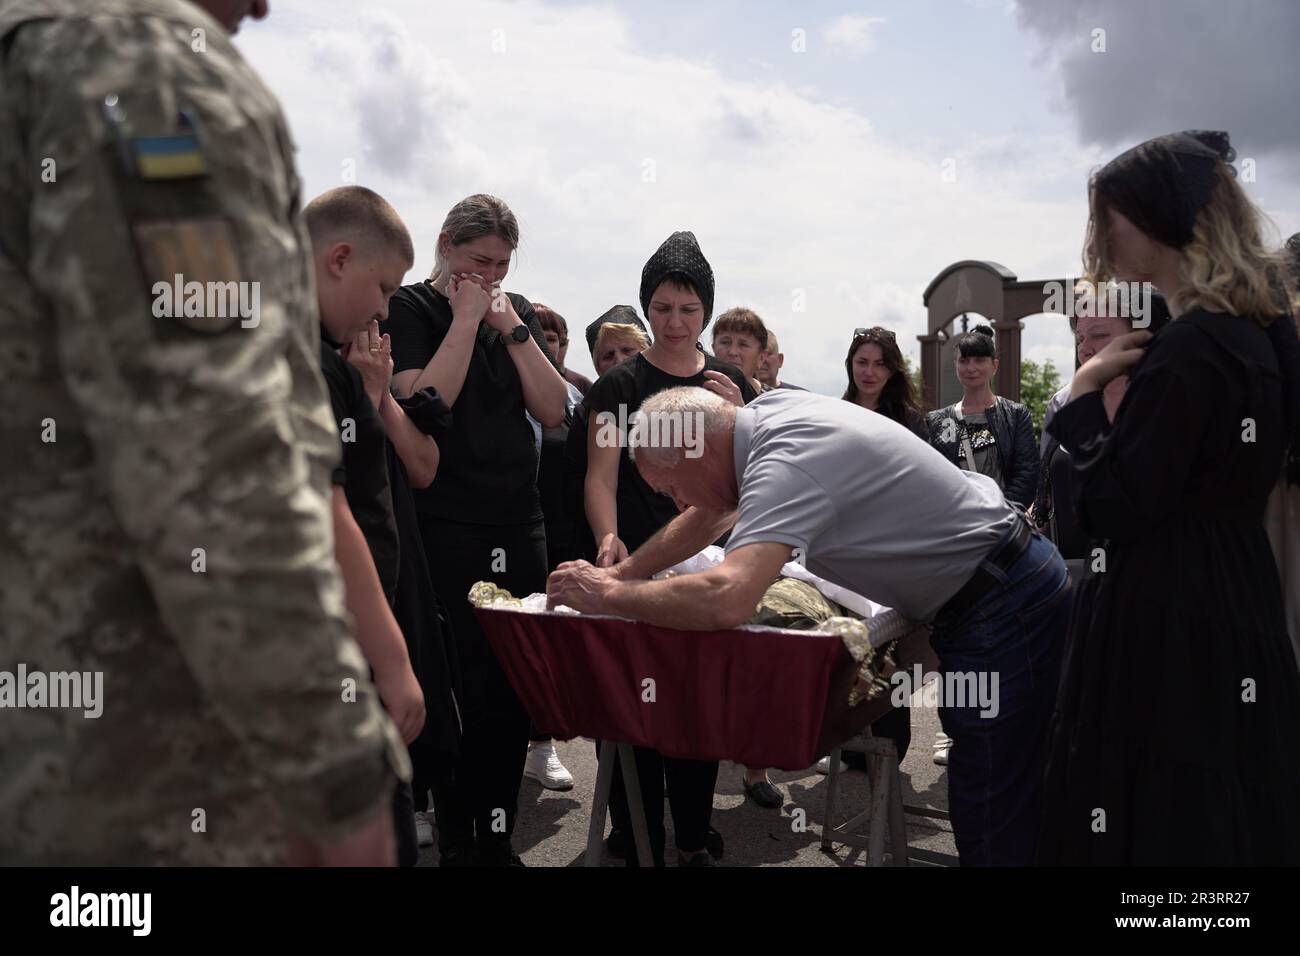 https://c8.alamy.com/comp/2R3RR27/dnipro-ukraine-24th-may-2023-editors-note-image-depicts-death-a-father-says-goodbye-to-his-dead-son-as-his-casket-is-ready-to-be-sealed-an-orthodox-military-funeral-was-held-in-a-dnipro-cemetery-for-47-year-old-ukrainian-serviceman-oleksandr-the-92nd-brigade-soldier-who-was-killed-by-a-russian-sniper-three-days-earlier-on-the-21st-of-may-in-novoselivka-kharkiv-oblast-photo-by-mihir-melwanisopa-imagessipa-usa-credit-sipa-usaalamy-live-news-2R3RR27.jpg